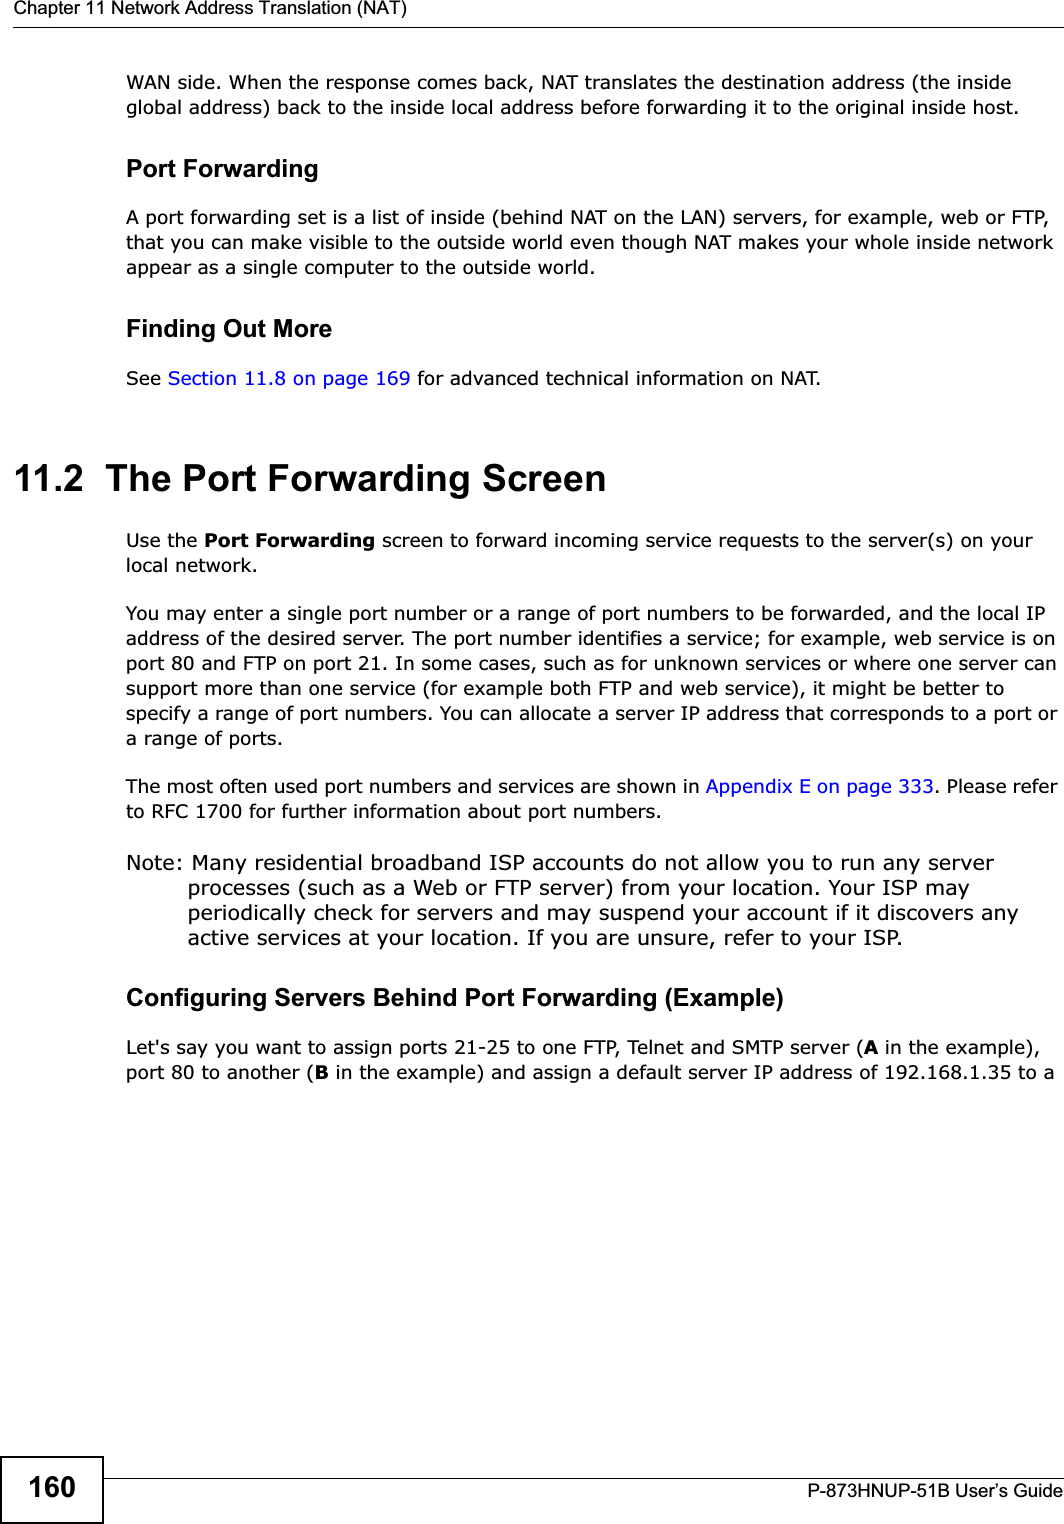 Chapter 11 Network Address Translation (NAT)P-873HNUP-51B User’s Guide160WAN side. When the response comes back, NAT translates the destination address (the inside global address) back to the inside local address before forwarding it to the original inside host.Port ForwardingA port forwarding set is a list of inside (behind NAT on the LAN) servers, for example, web or FTP, that you can make visible to the outside world even though NAT makes your whole inside network appear as a single computer to the outside world.Finding Out MoreSee Section 11.8 on page 169 for advanced technical information on NAT.11.2  The Port Forwarding Screen Use the Port Forwarding screen to forward incoming service requests to the server(s) on your local network.You may enter a single port number or a range of port numbers to be forwarded, and the local IP address of the desired server. The port number identifies a service; for example, web service is on port 80 and FTP on port 21. In some cases, such as for unknown services or where one server can support more than one service (for example both FTP and web service), it might be better to specify a range of port numbers. You can allocate a server IP address that corresponds to a port or a range of ports.The most often used port numbers and services are shown in Appendix E on page 333. Please refer to RFC 1700 for further information about port numbers. Note: Many residential broadband ISP accounts do not allow you to run any server processes (such as a Web or FTP server) from your location. Your ISP may periodically check for servers and may suspend your account if it discovers any active services at your location. If you are unsure, refer to your ISP.Configuring Servers Behind Port Forwarding (Example)Let&apos;s say you want to assign ports 21-25 to one FTP, Telnet and SMTP server (A in the example), port 80 to another (B in the example) and assign a default server IP address of 192.168.1.35 to a 